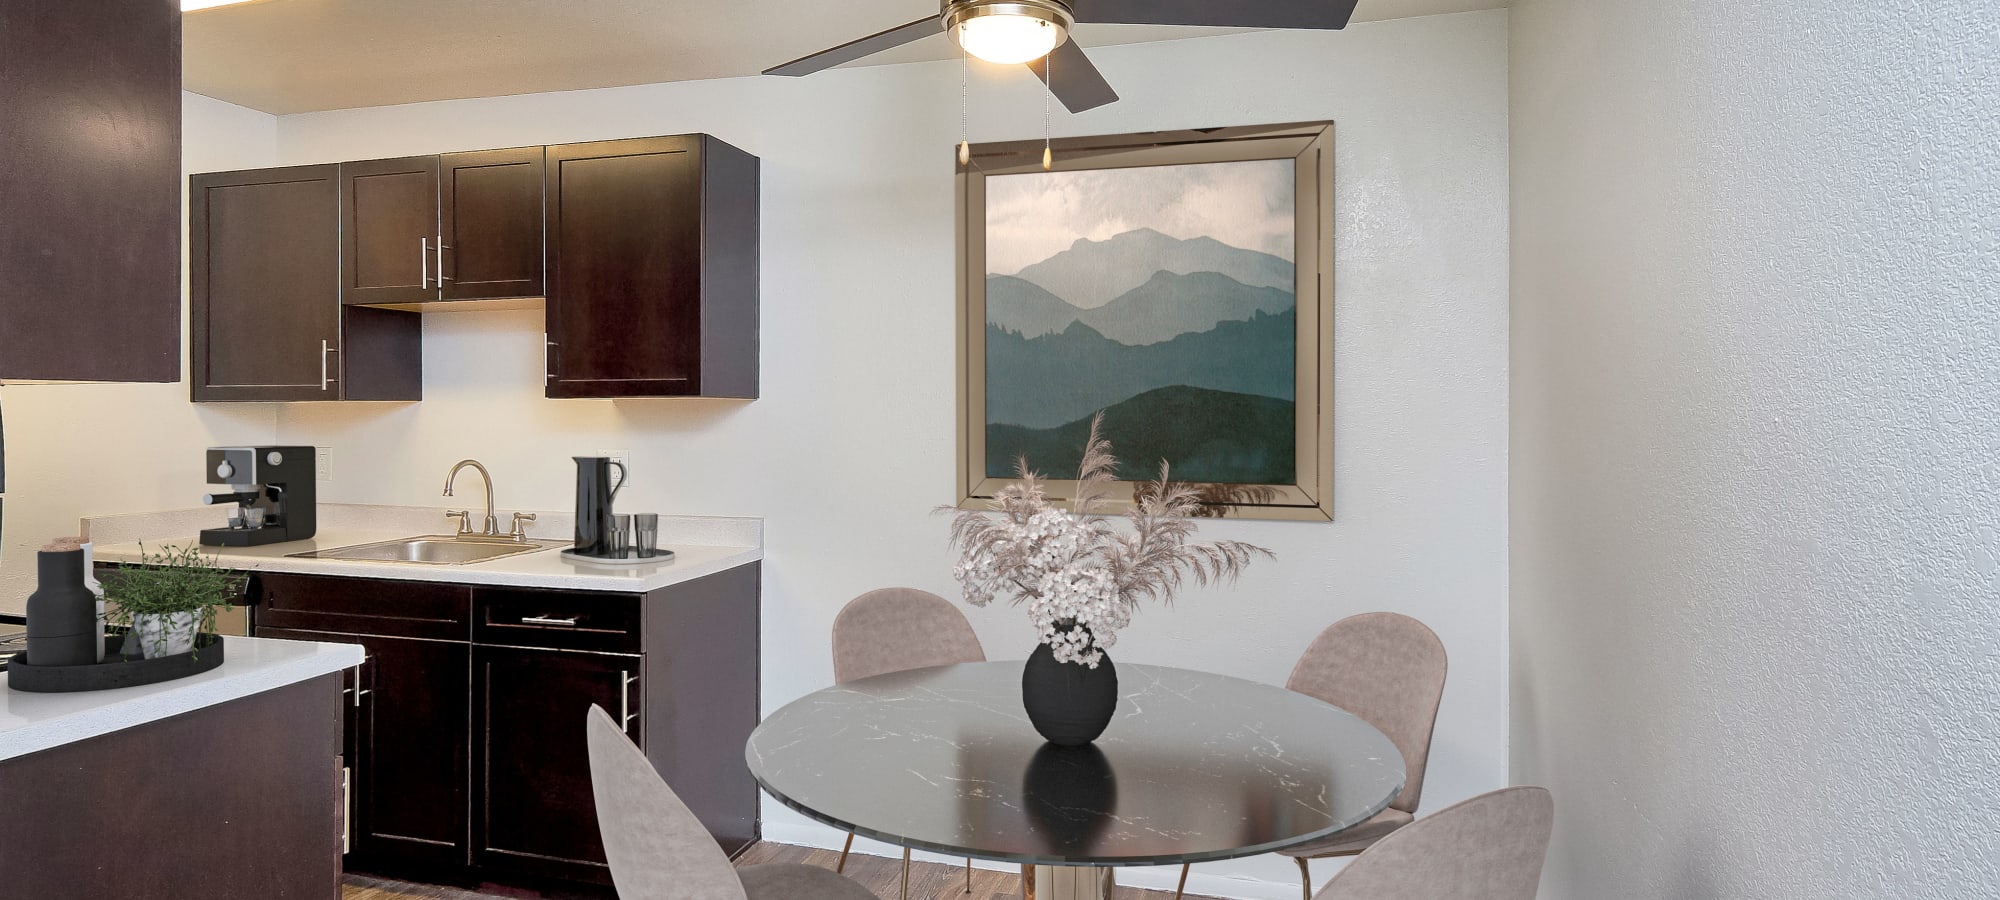 Apartments from Callaway Apartments in Taylorsville, Utah